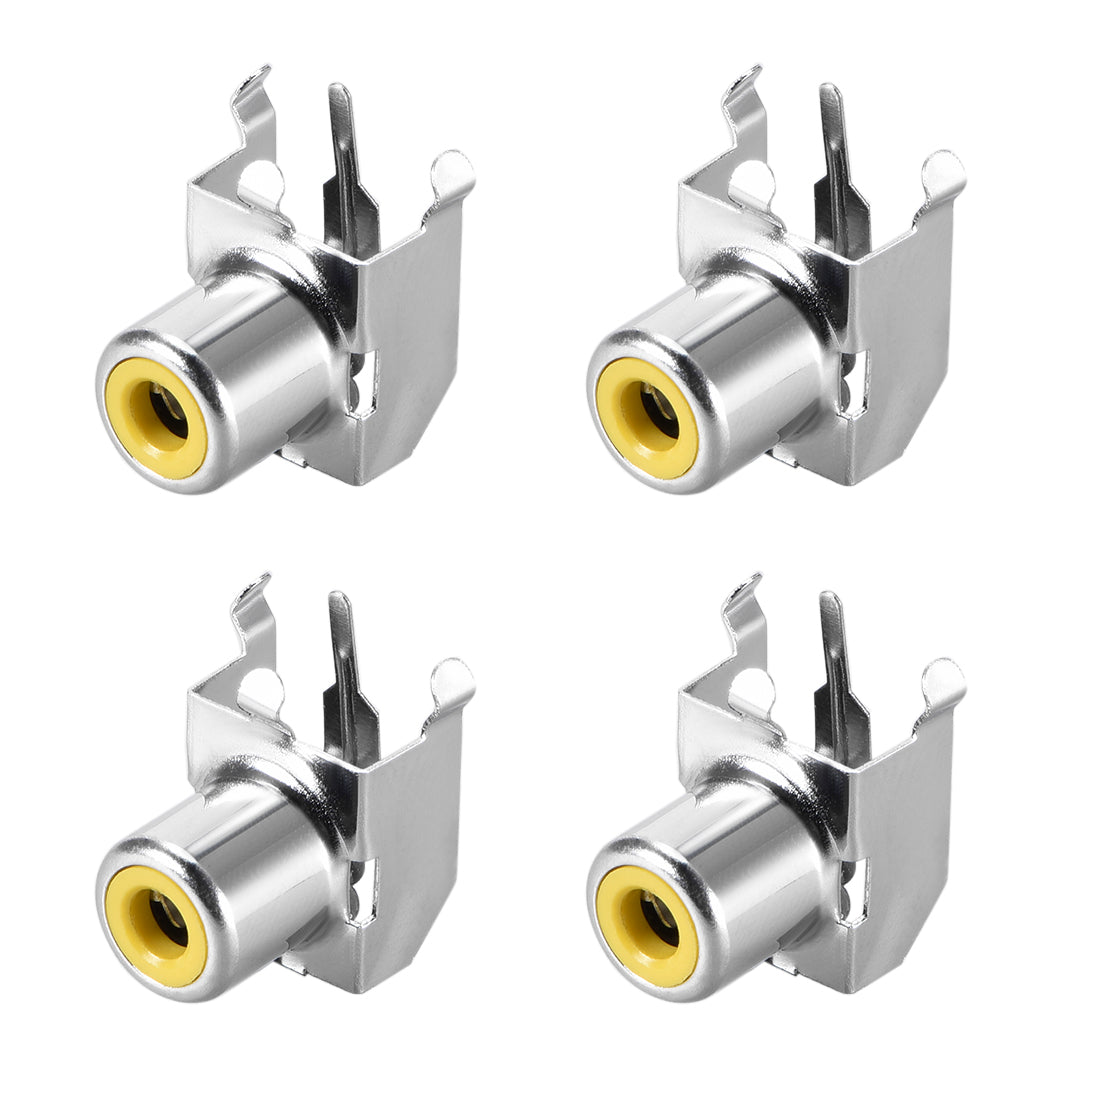 uxcell Uxcell PCB Panel Mount Single RCA Socket Female Jack Audio Video AV Connector Silver Tone 4Pcs